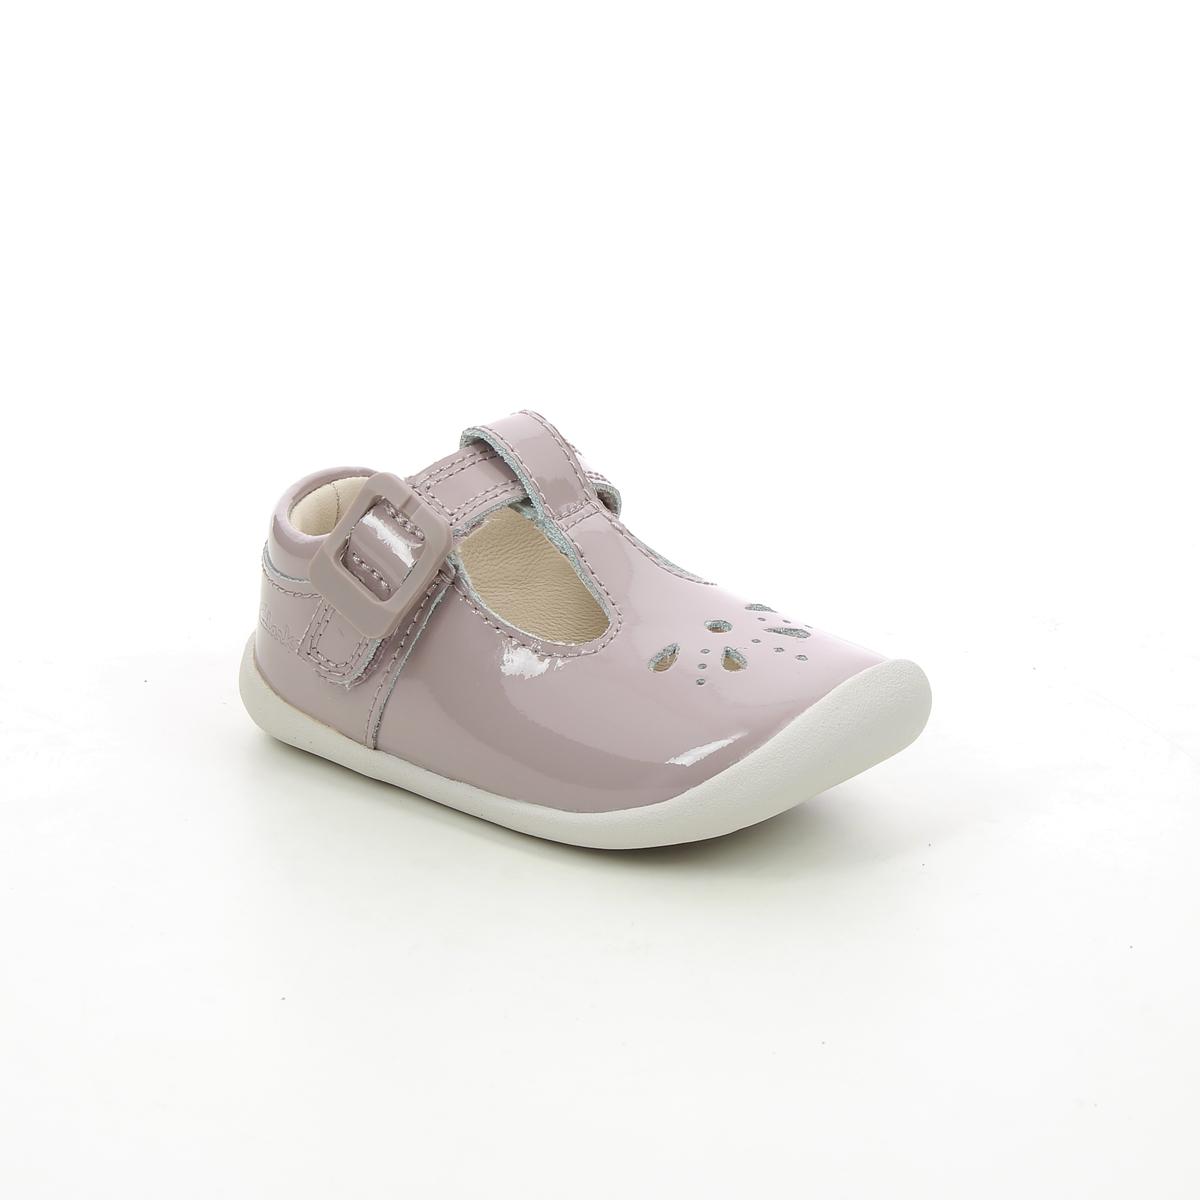 shuttle Frem Aktiver Clarks Roamer Star T H Fit Pink girls first and baby shoes